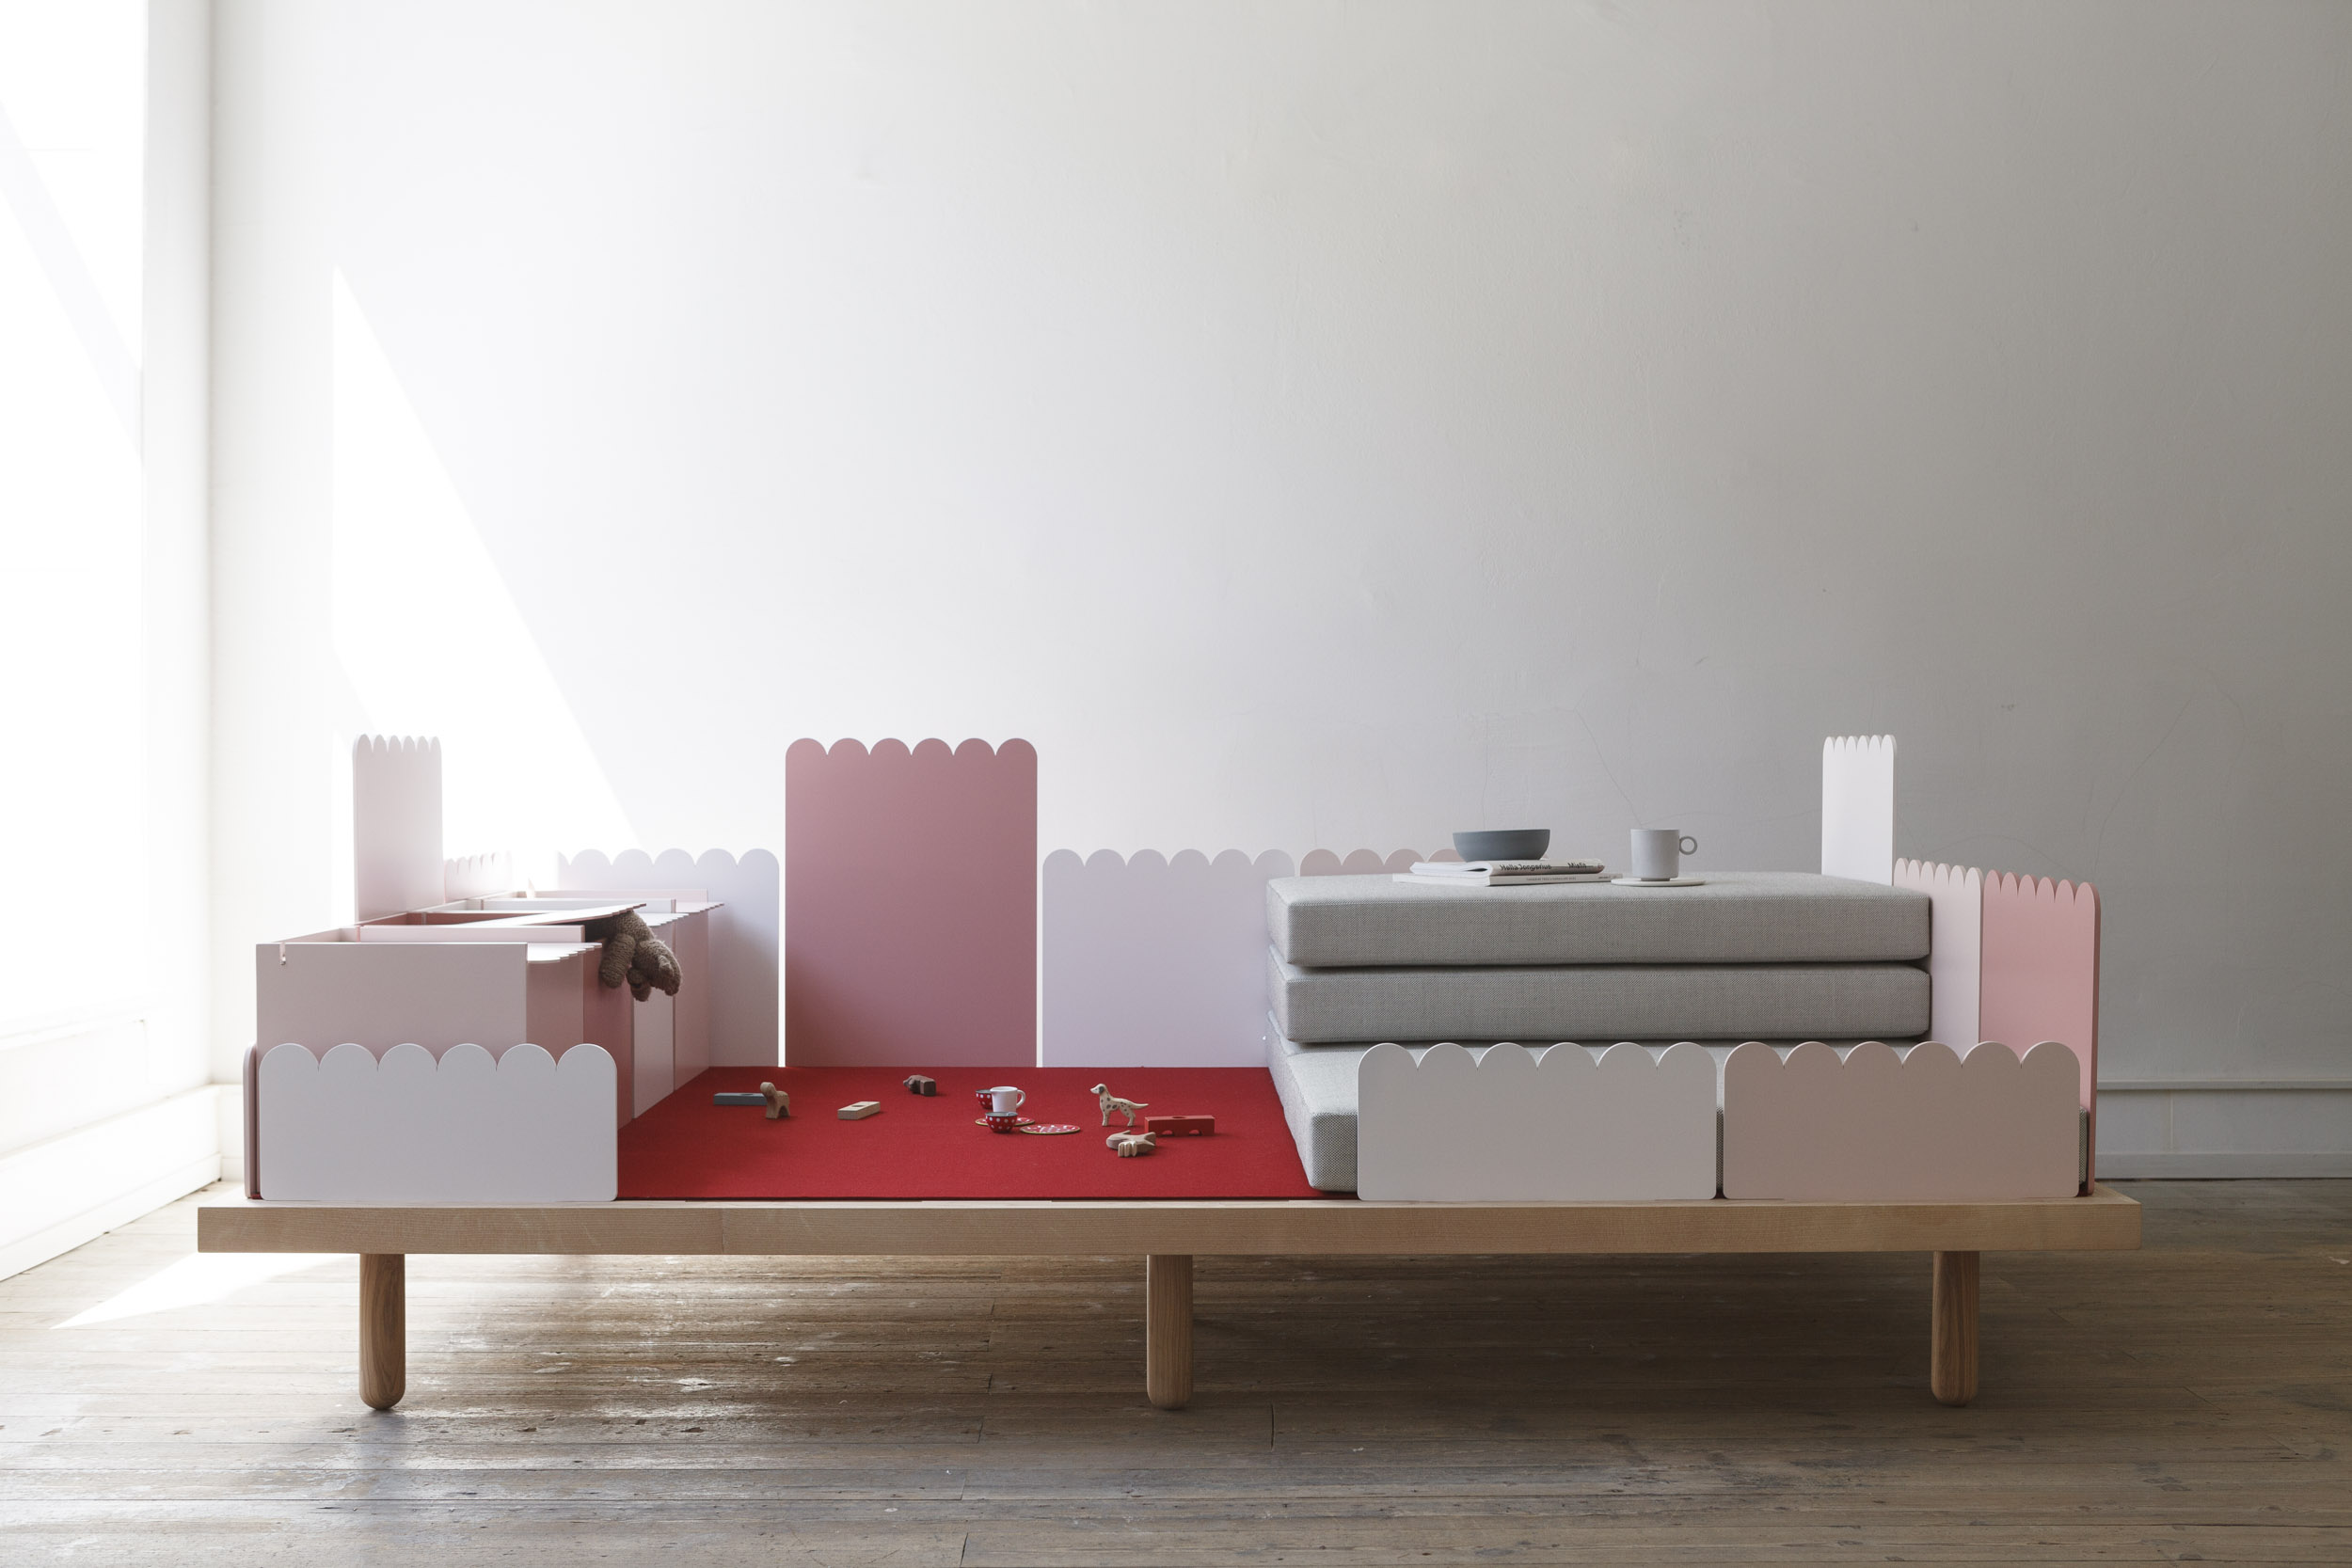  DIVANO PER LA FAMIGLIA  Multifunctional sofa for children and adults    ASH WOOD, LACQUERED ALUMINIUM, KVADRAT BASEL TEXTILE, RED MERINO WOOL FELT  245 x 150 x 30cm ( Height over all 100cm )  stackable back parts and lower legs ( 15cm ) for a babies